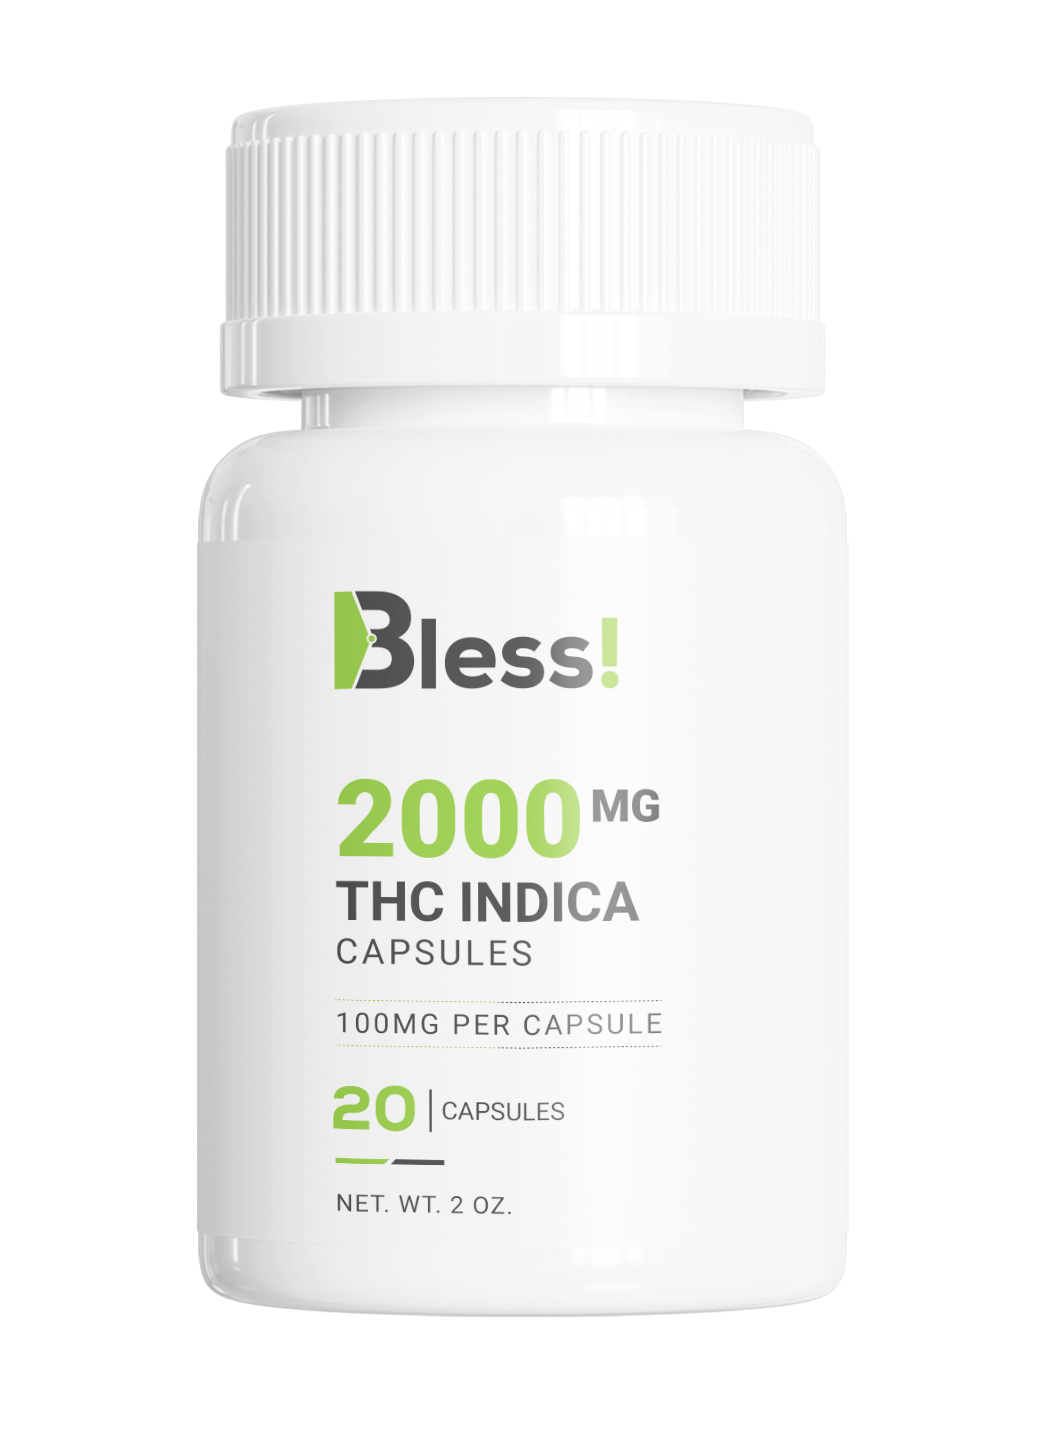 Buy Bless! - 2000MG THC Capsules (INDICA) at MMJ Express Online Shop